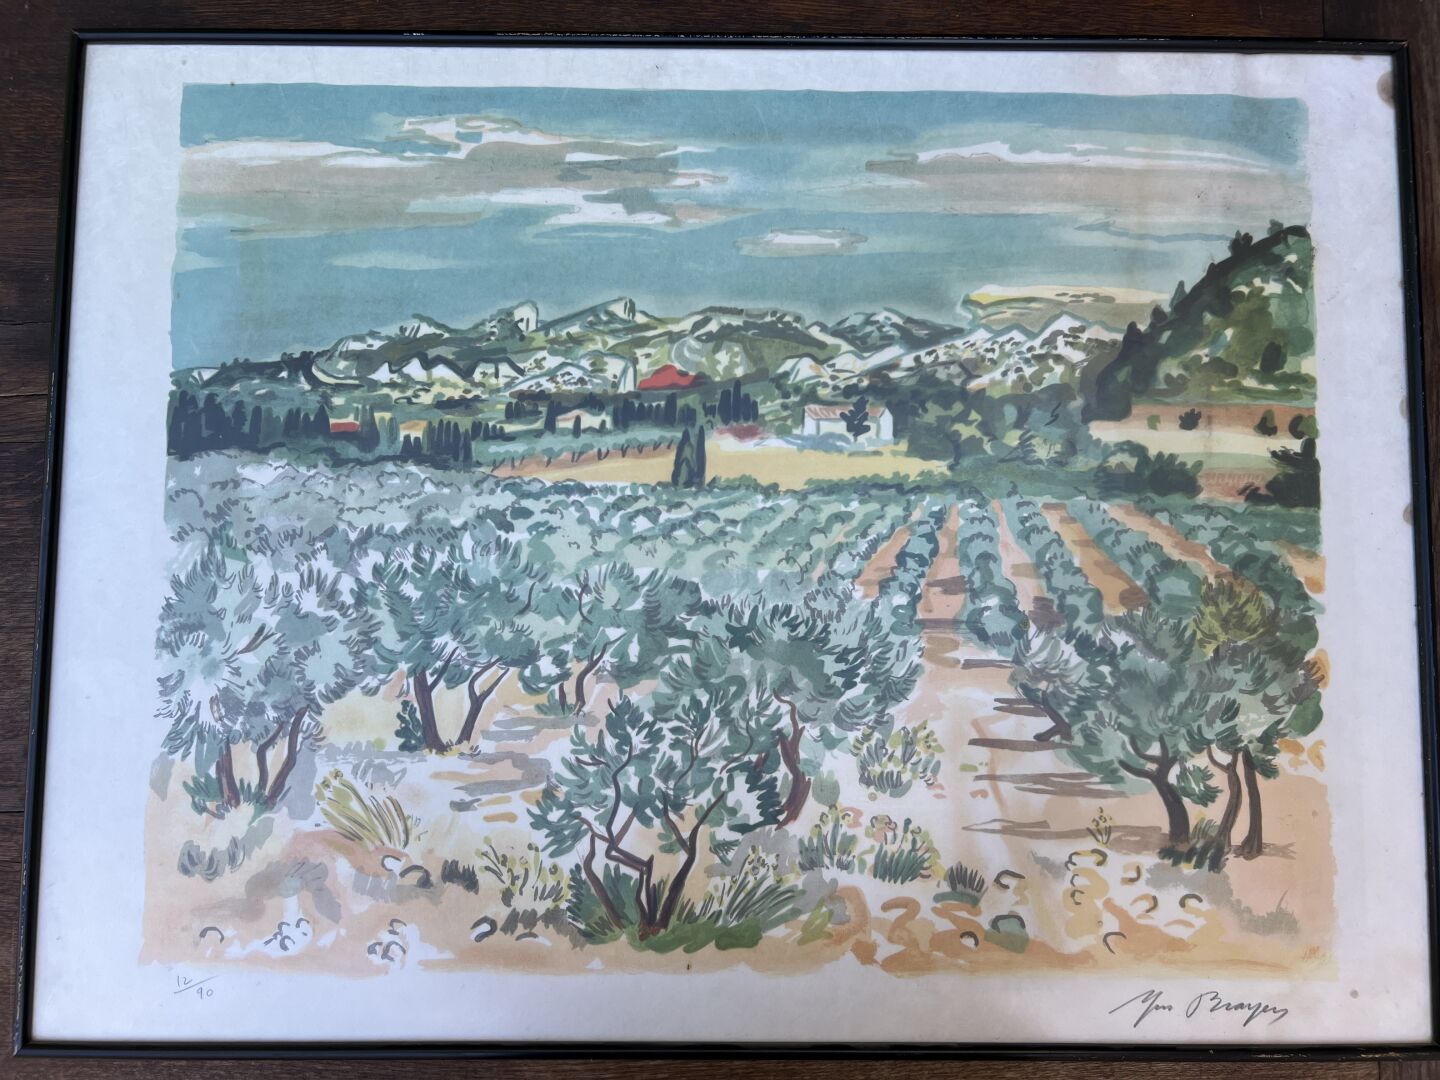 Null Yves Brayer (1907-1990)
Spring view
Lithograph on Japan paper. 
56 x 75 cm